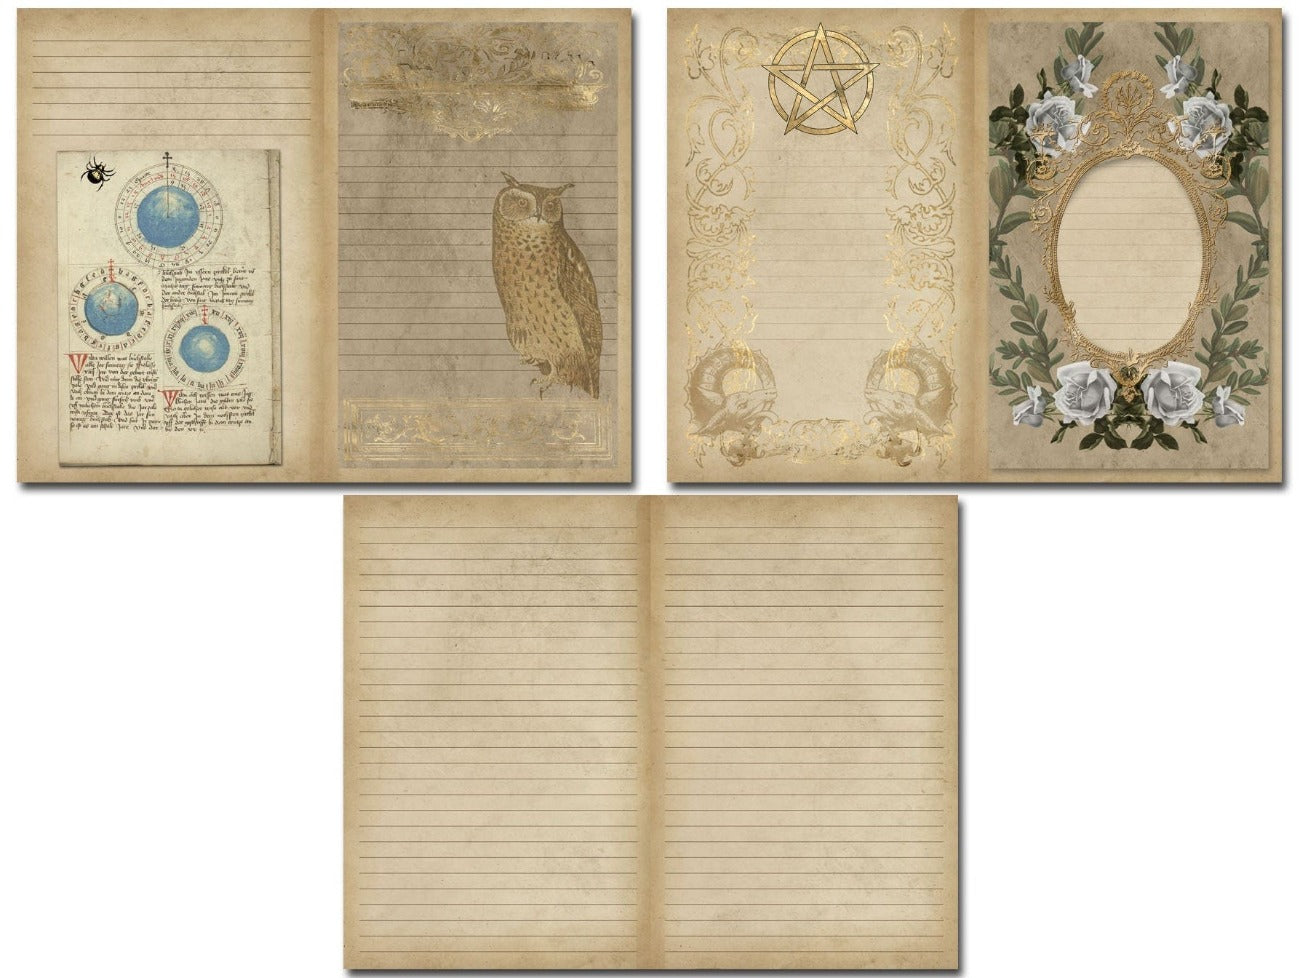 DRAGON GRIMOIRE, Printable Digital Junk Journal Kit for your Book of Shadows or Spellbook, Mystical World, Fire-Breathers, Fantasy Realm - Morgana Magick Spell